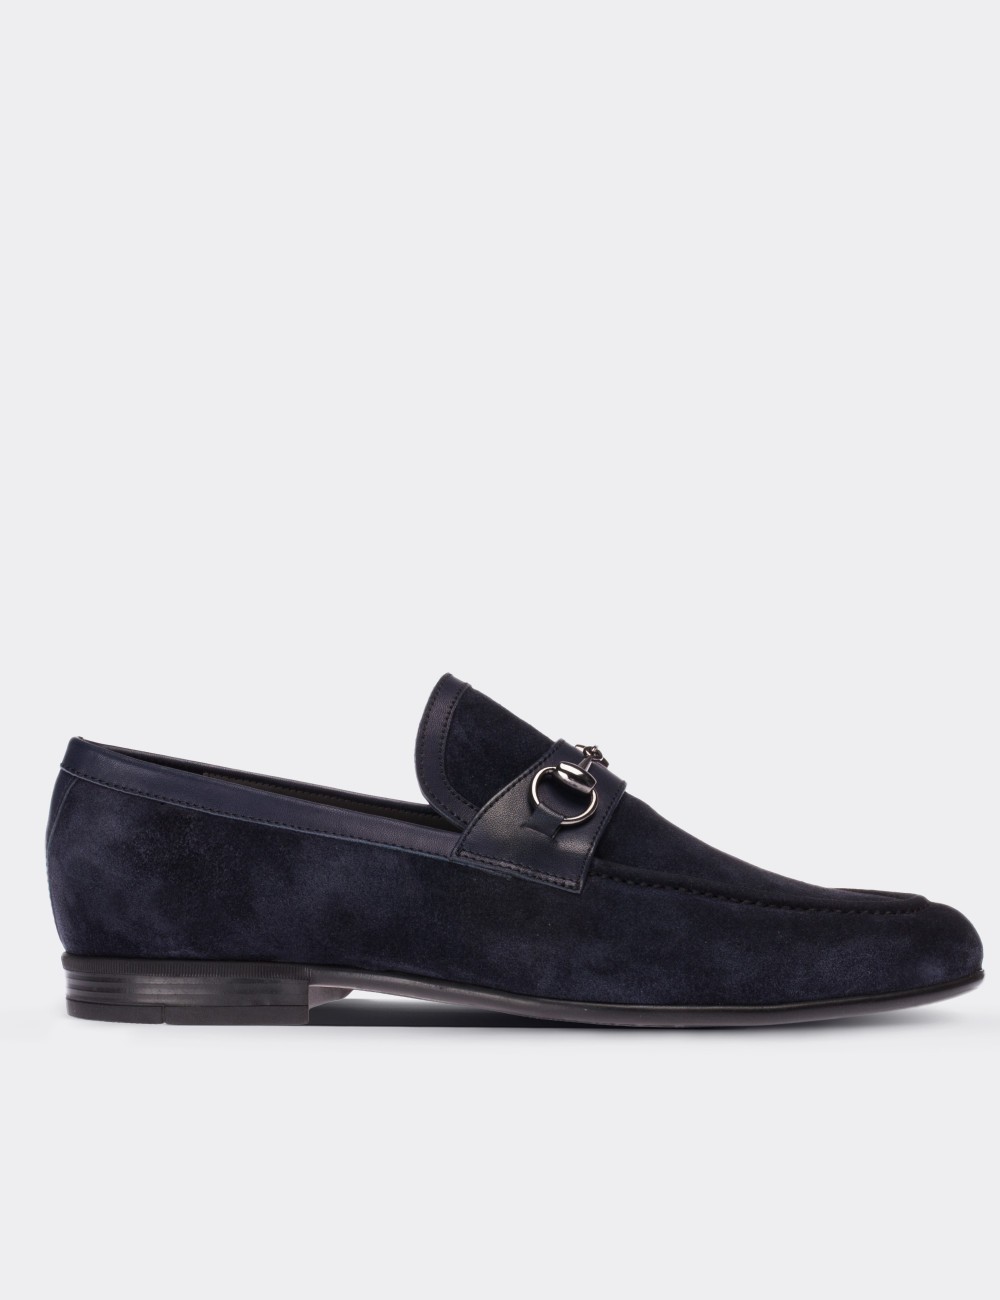 Navy Suede Leather Loafers - 01712MLCVC01